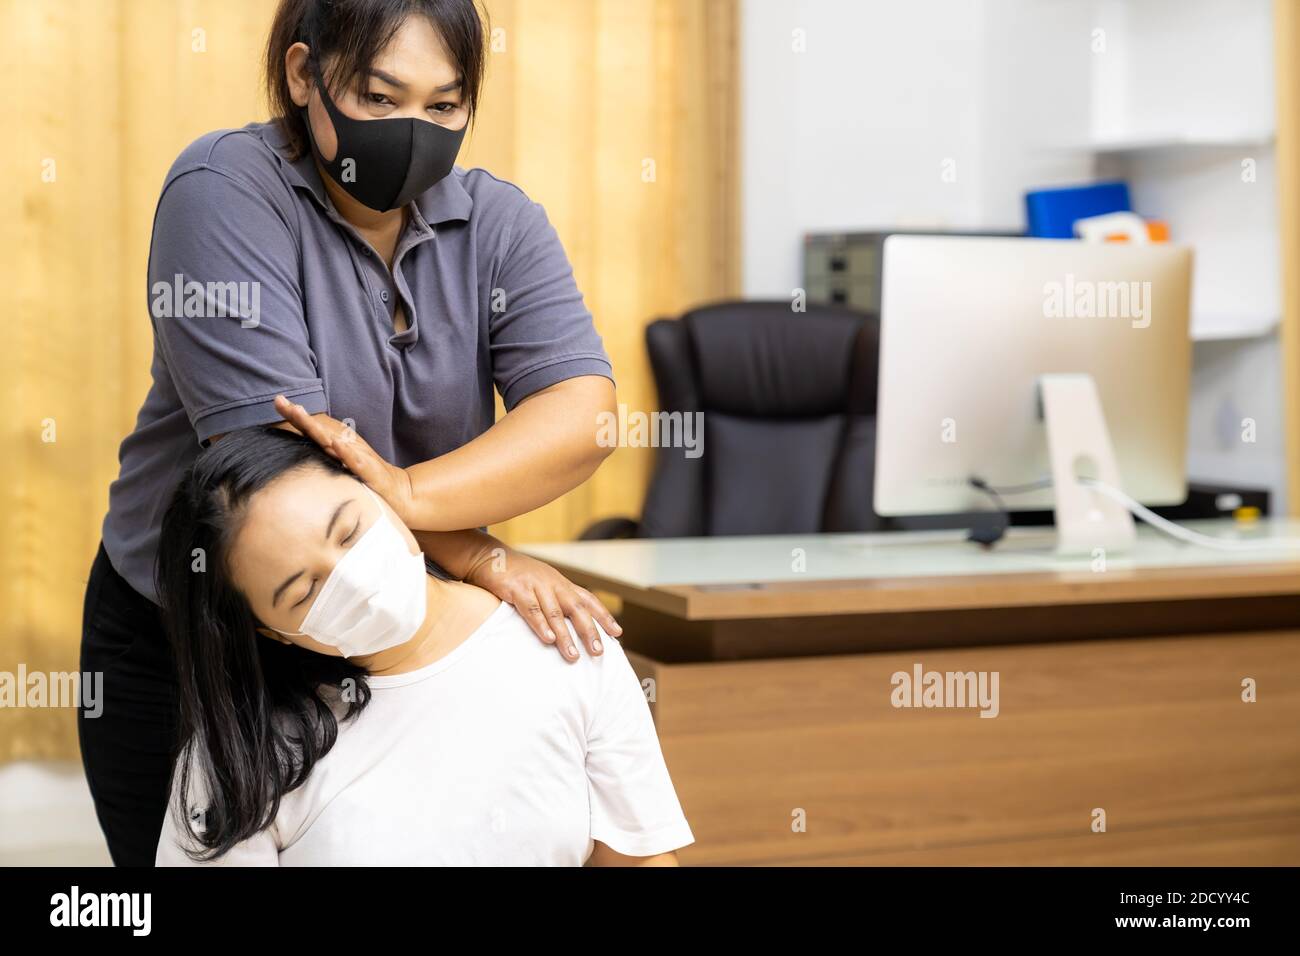 Quarantine asian woman do massage at home with face mask while city lockdown for social distance due to coronavirus pandemic. Massage is one of servic Stock Photo